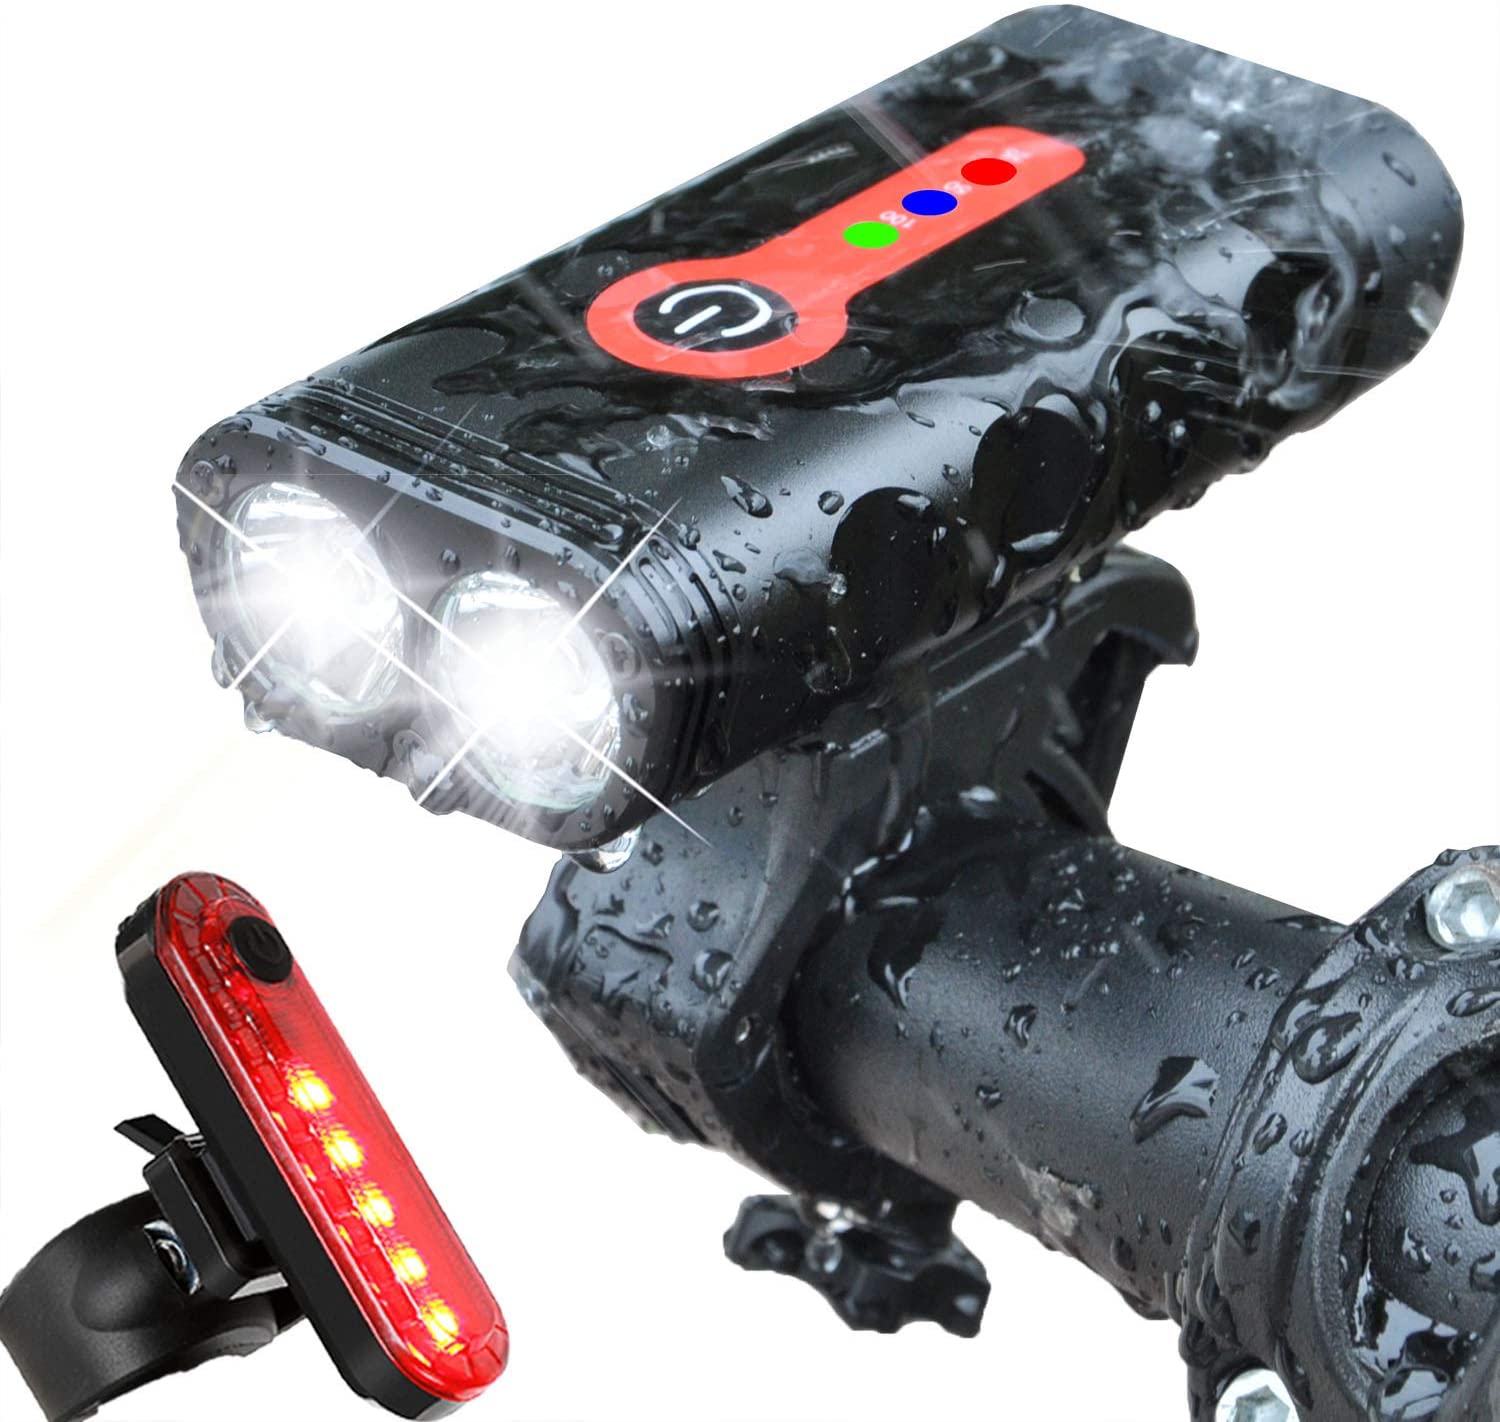 MTB Cycling Bike Light Lamp Set USB Rechargeable Bicycle Headlight Taillight